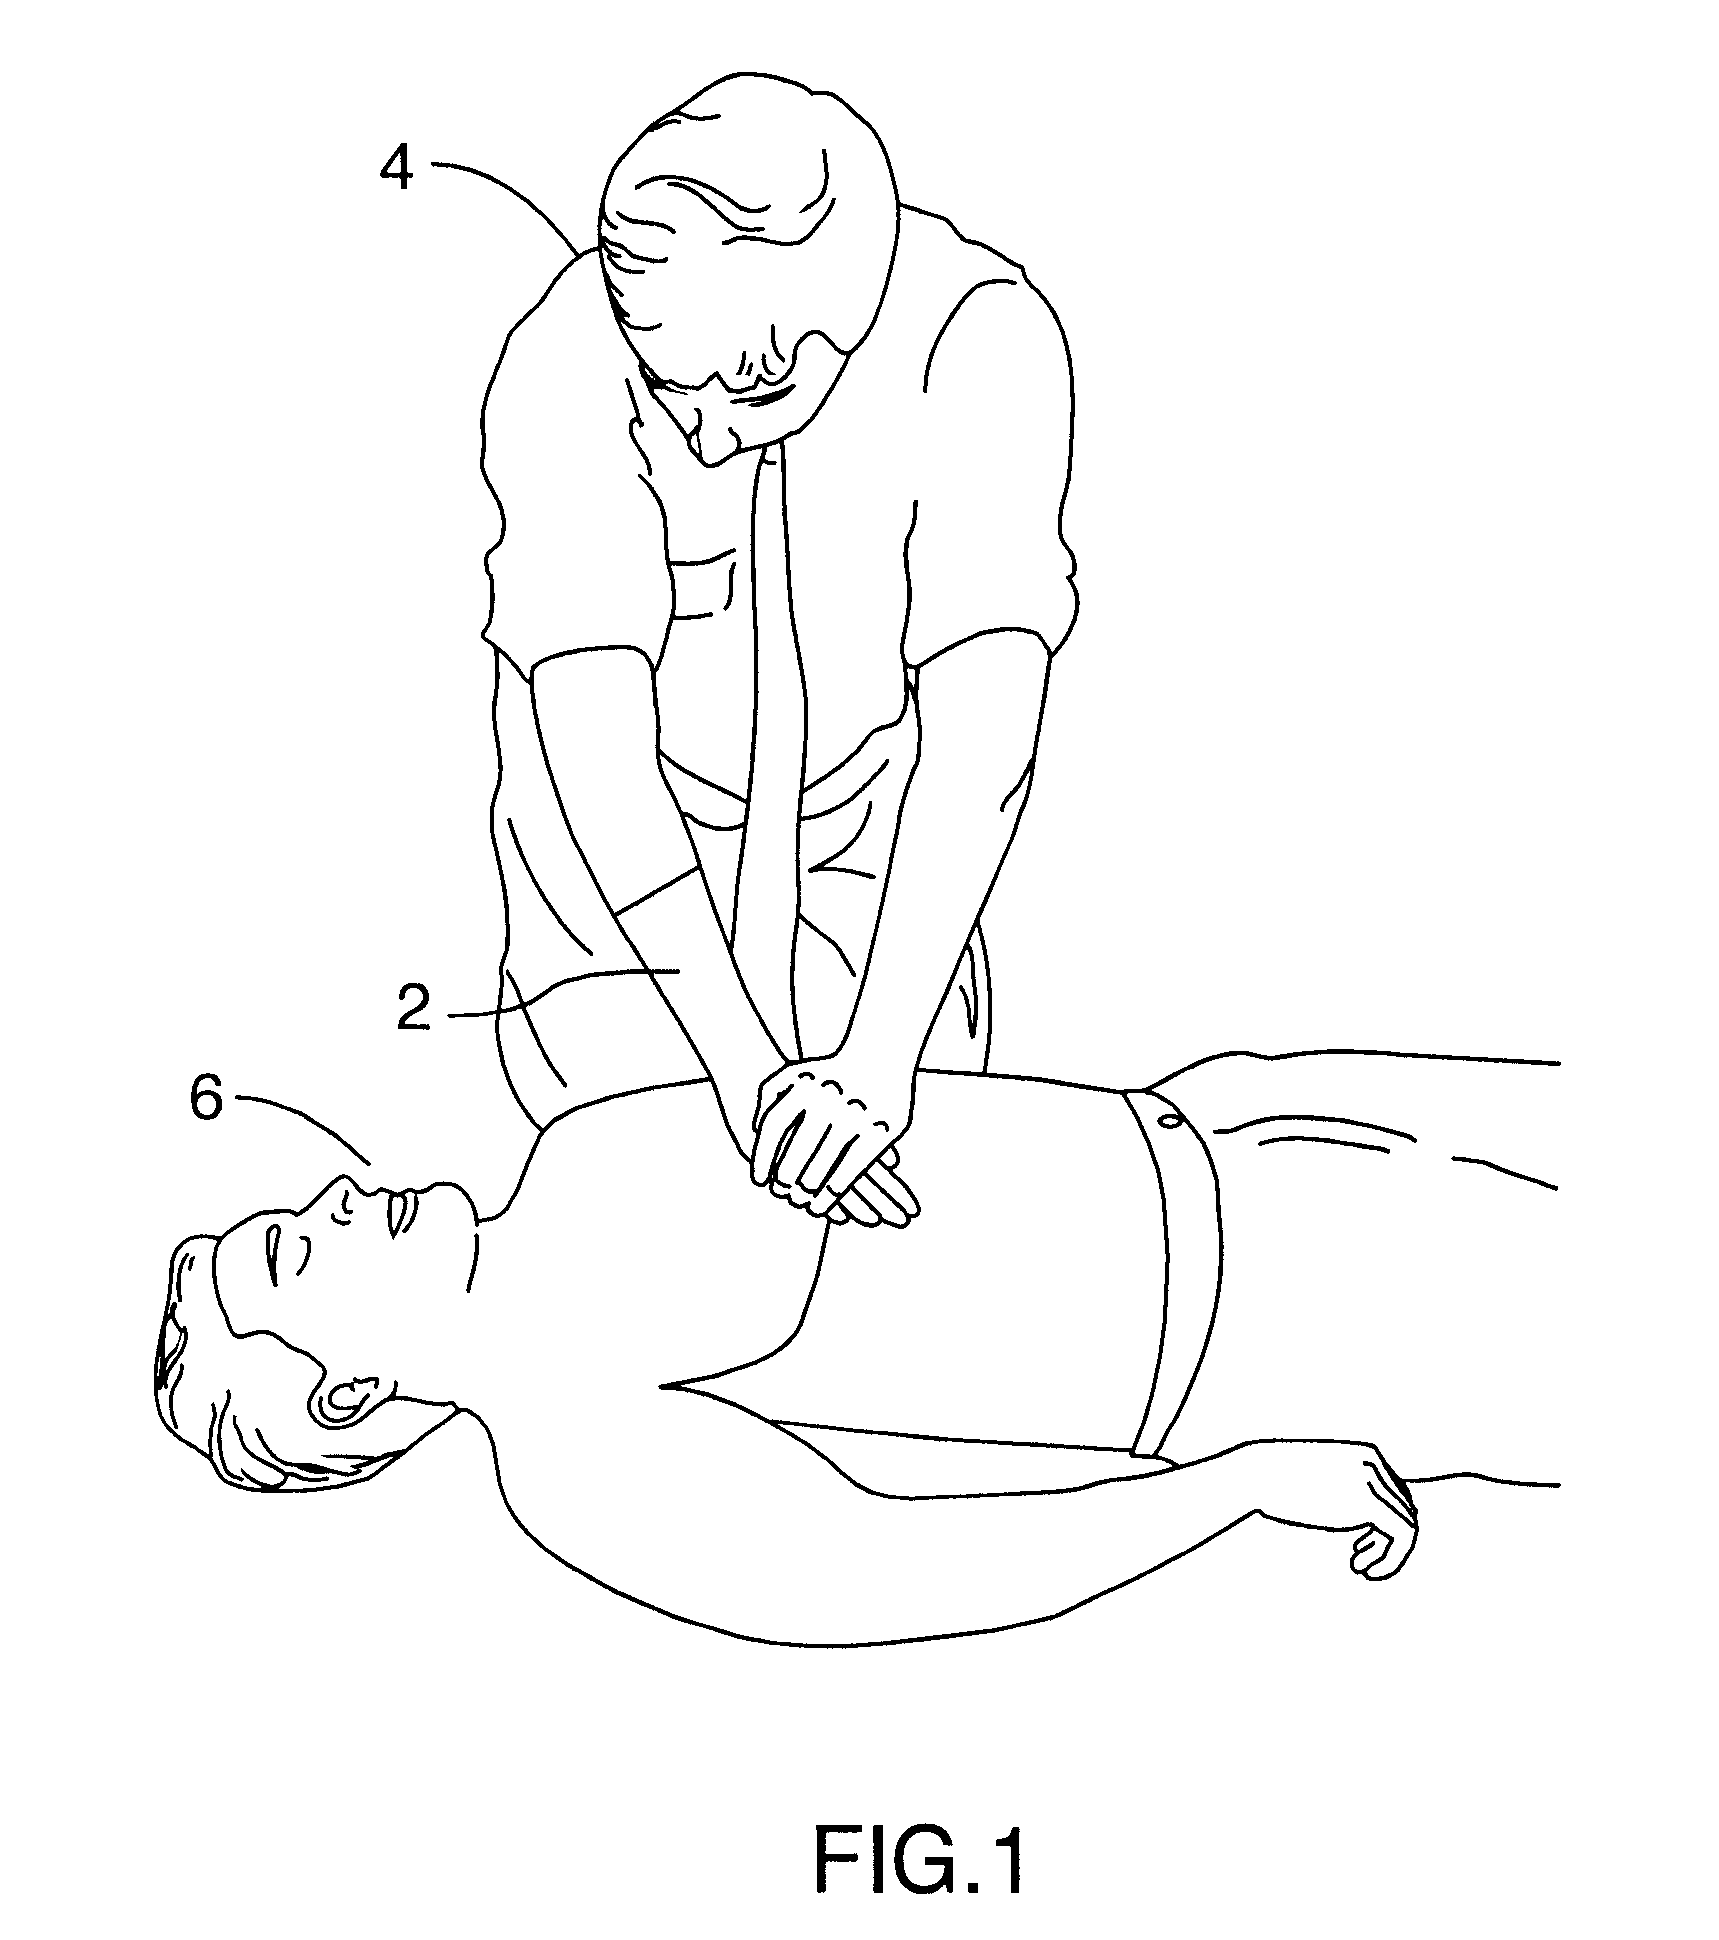 Wearable cpr assist, training and testing device